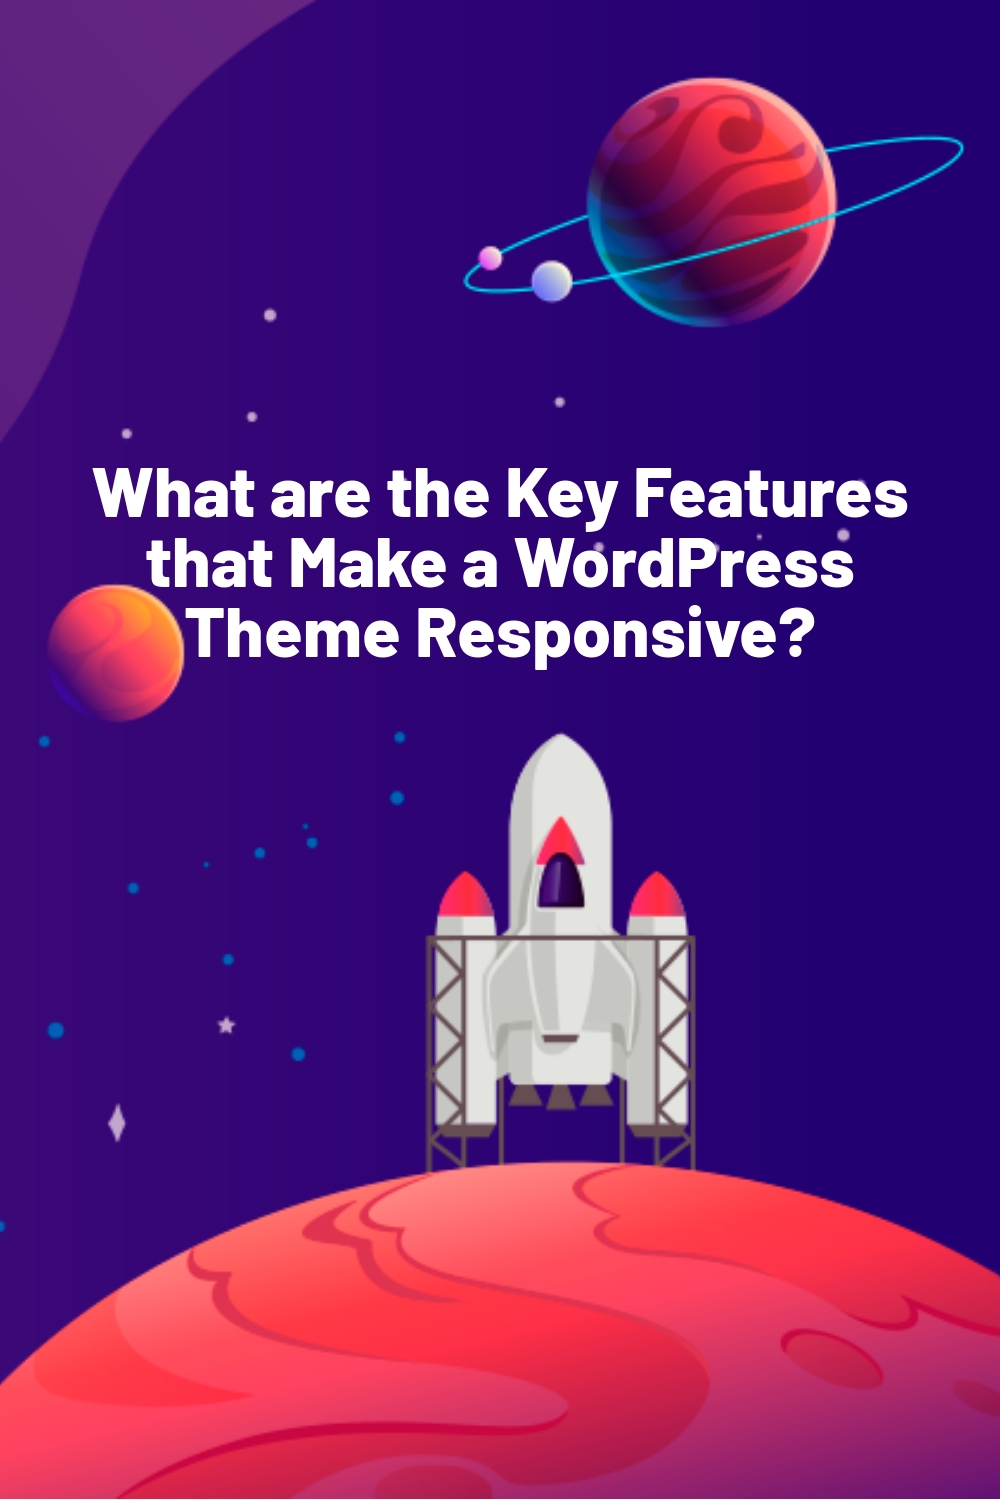 What are the Key Features that Make a WordPress Theme Responsive?